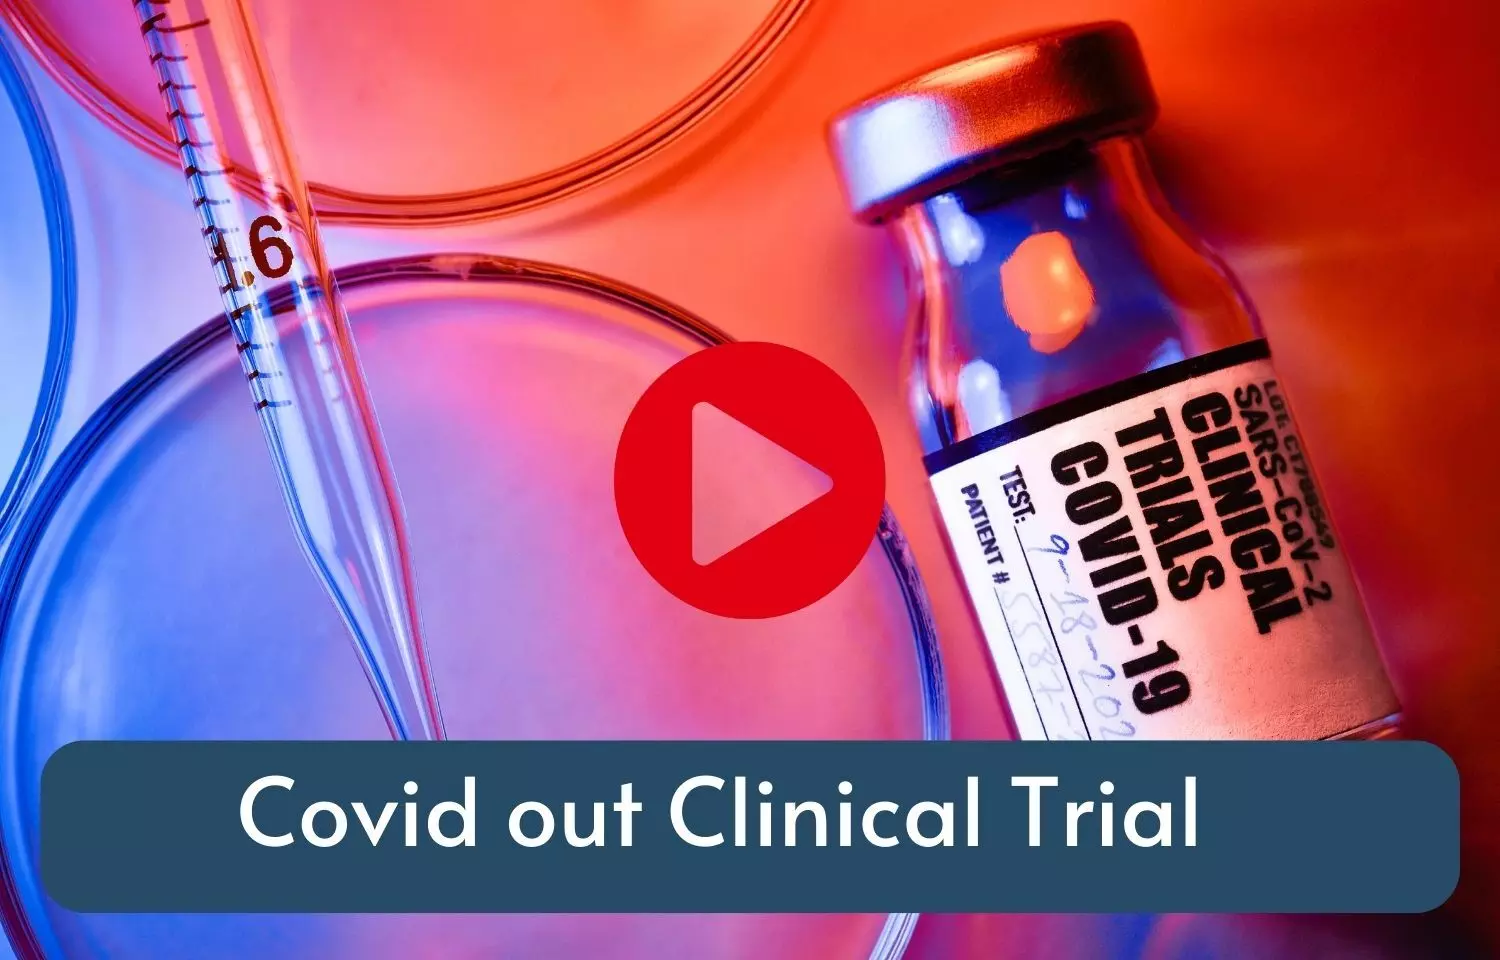 Covid out Clinical Trial